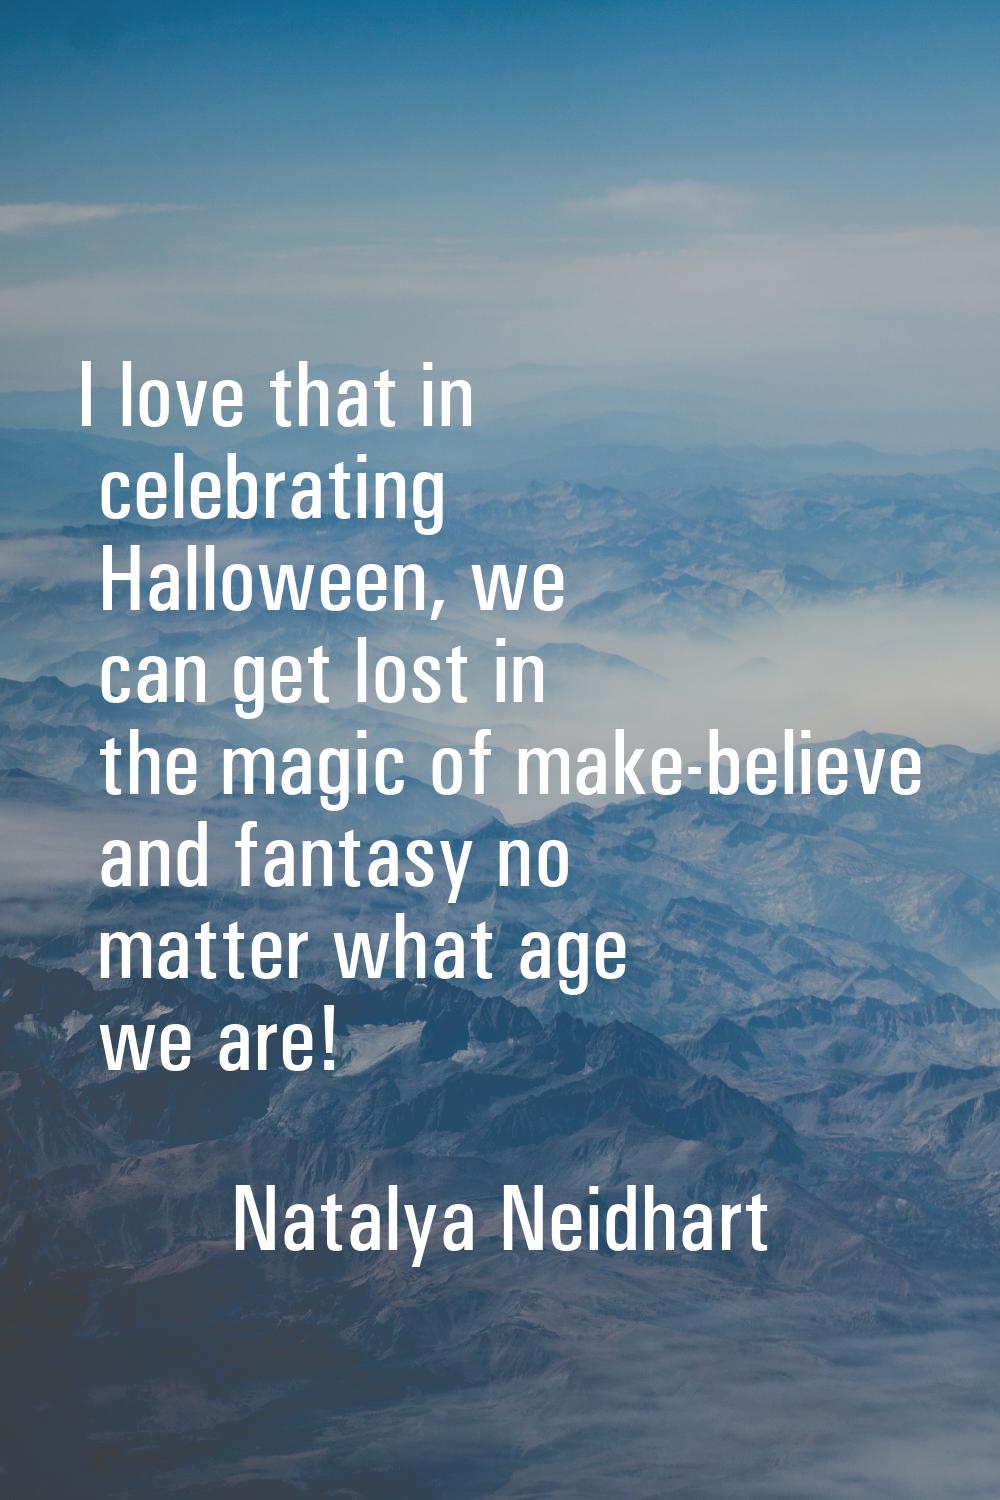 I love that in celebrating Halloween, we can get lost in the magic of make-believe and fantasy no m